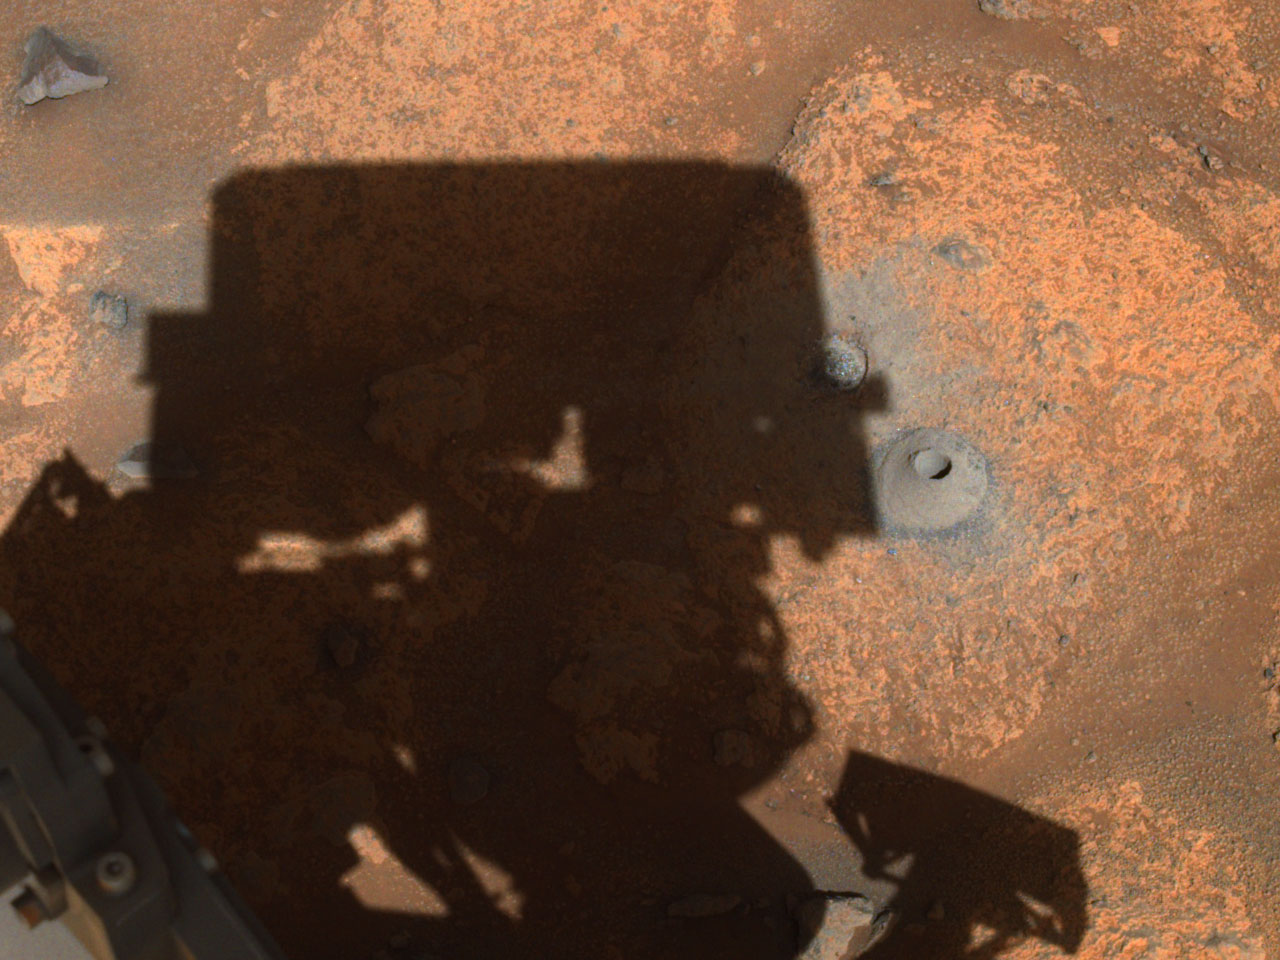 The drill hole from Perseverance’s first sample-collection attempt can be seen, along with the shadow of the rover, in this image taken by one of the rover’s navigation cameras. 